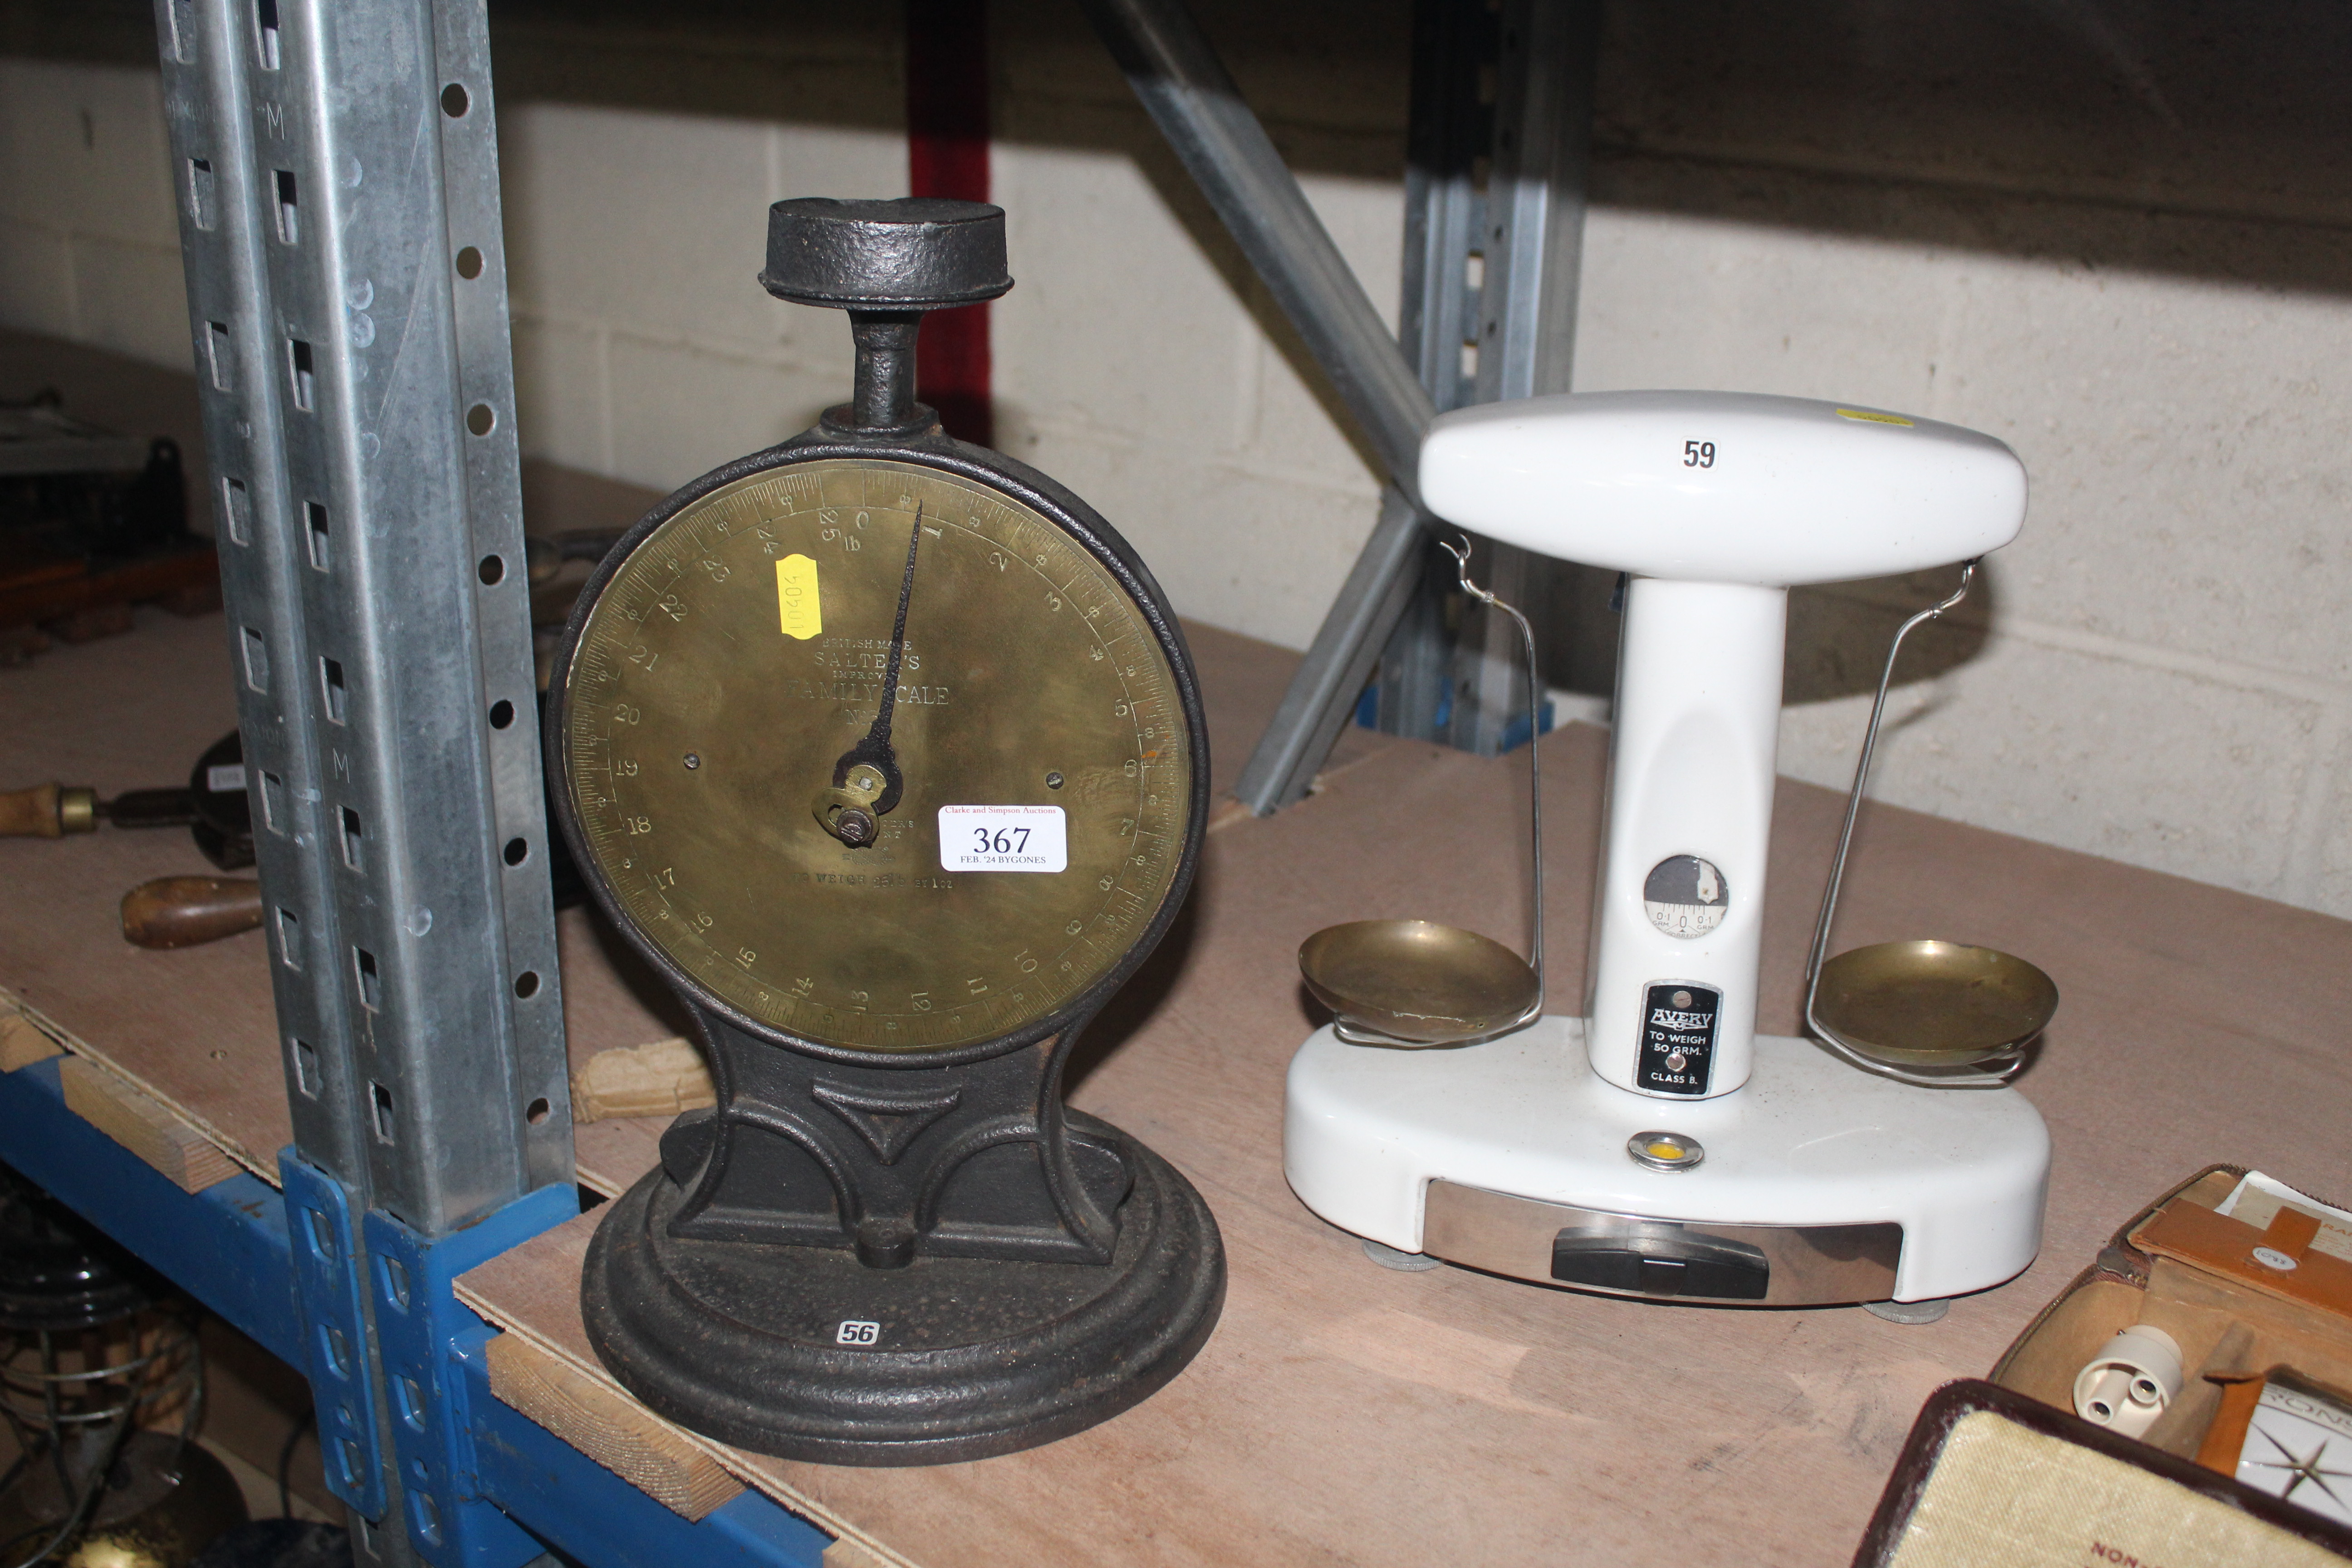 A brass faced Salter Family balance scale with no tray and a small Avery set of balance shop